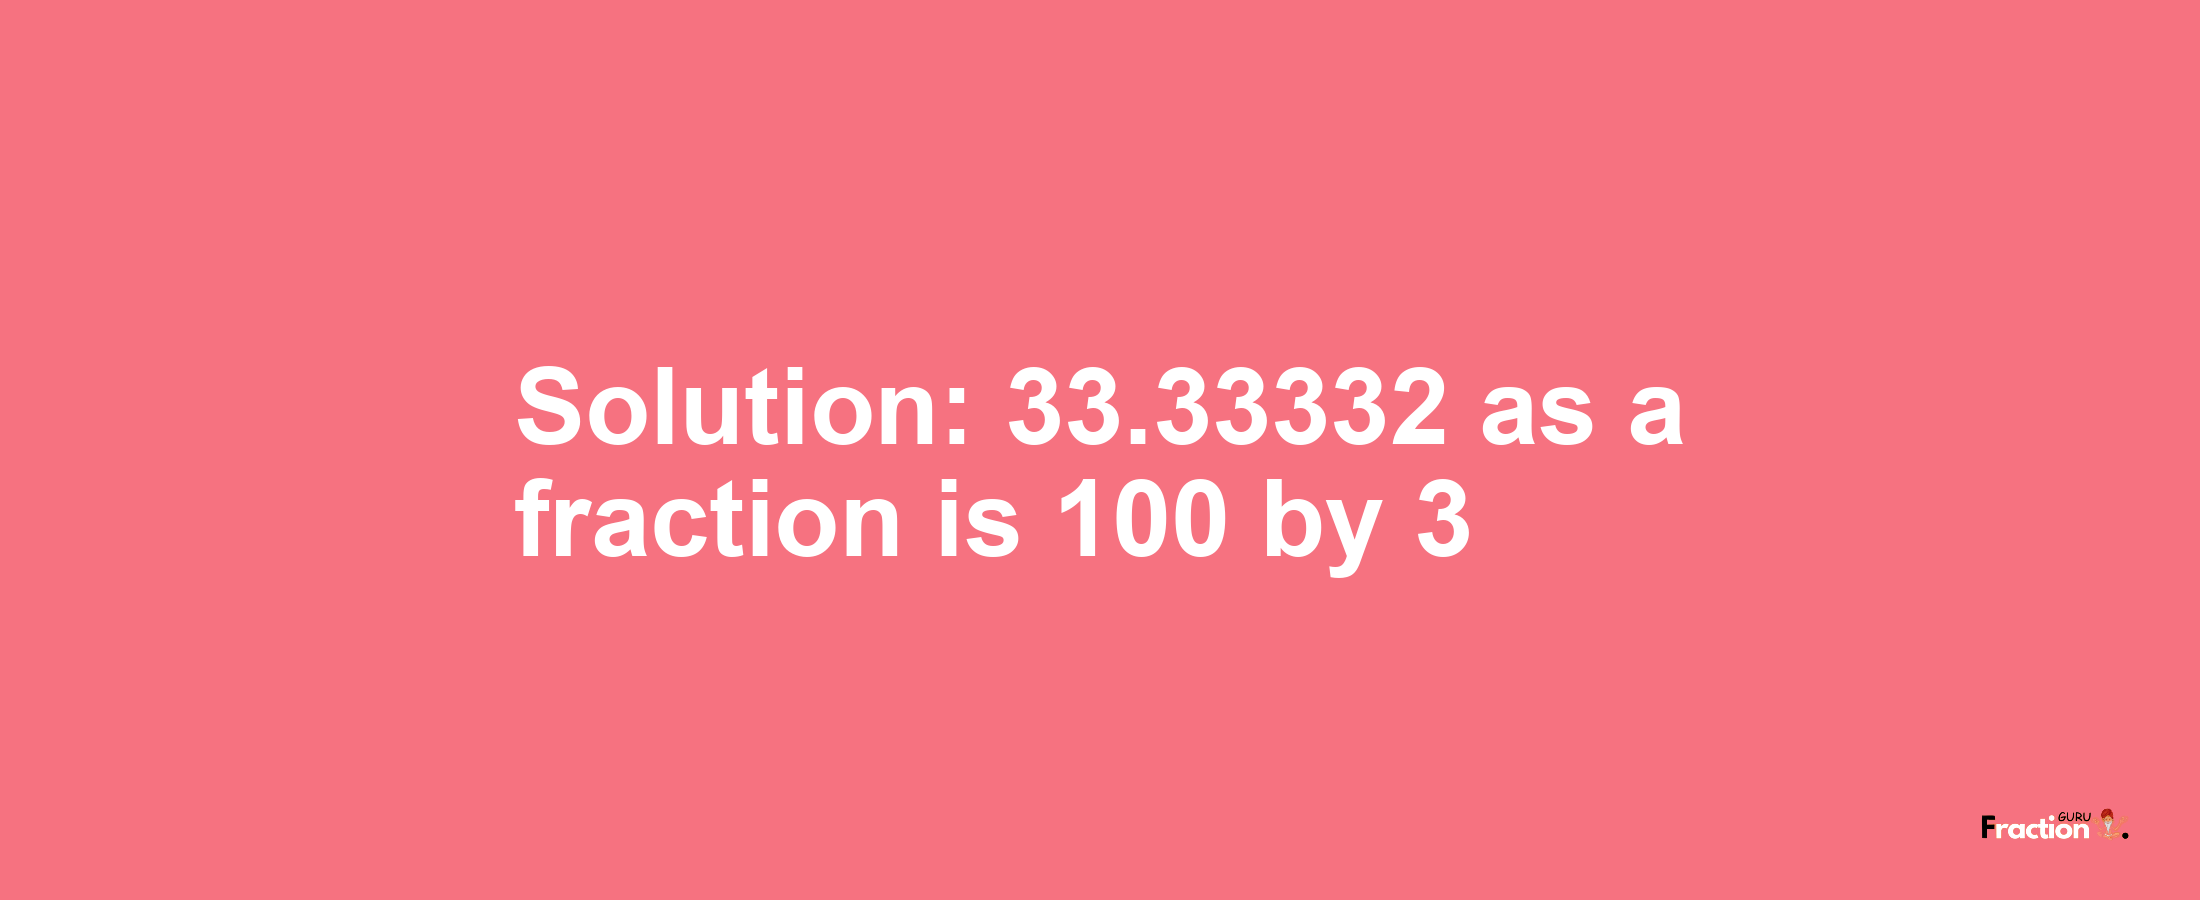 Solution:33.33332 as a fraction is 100/3